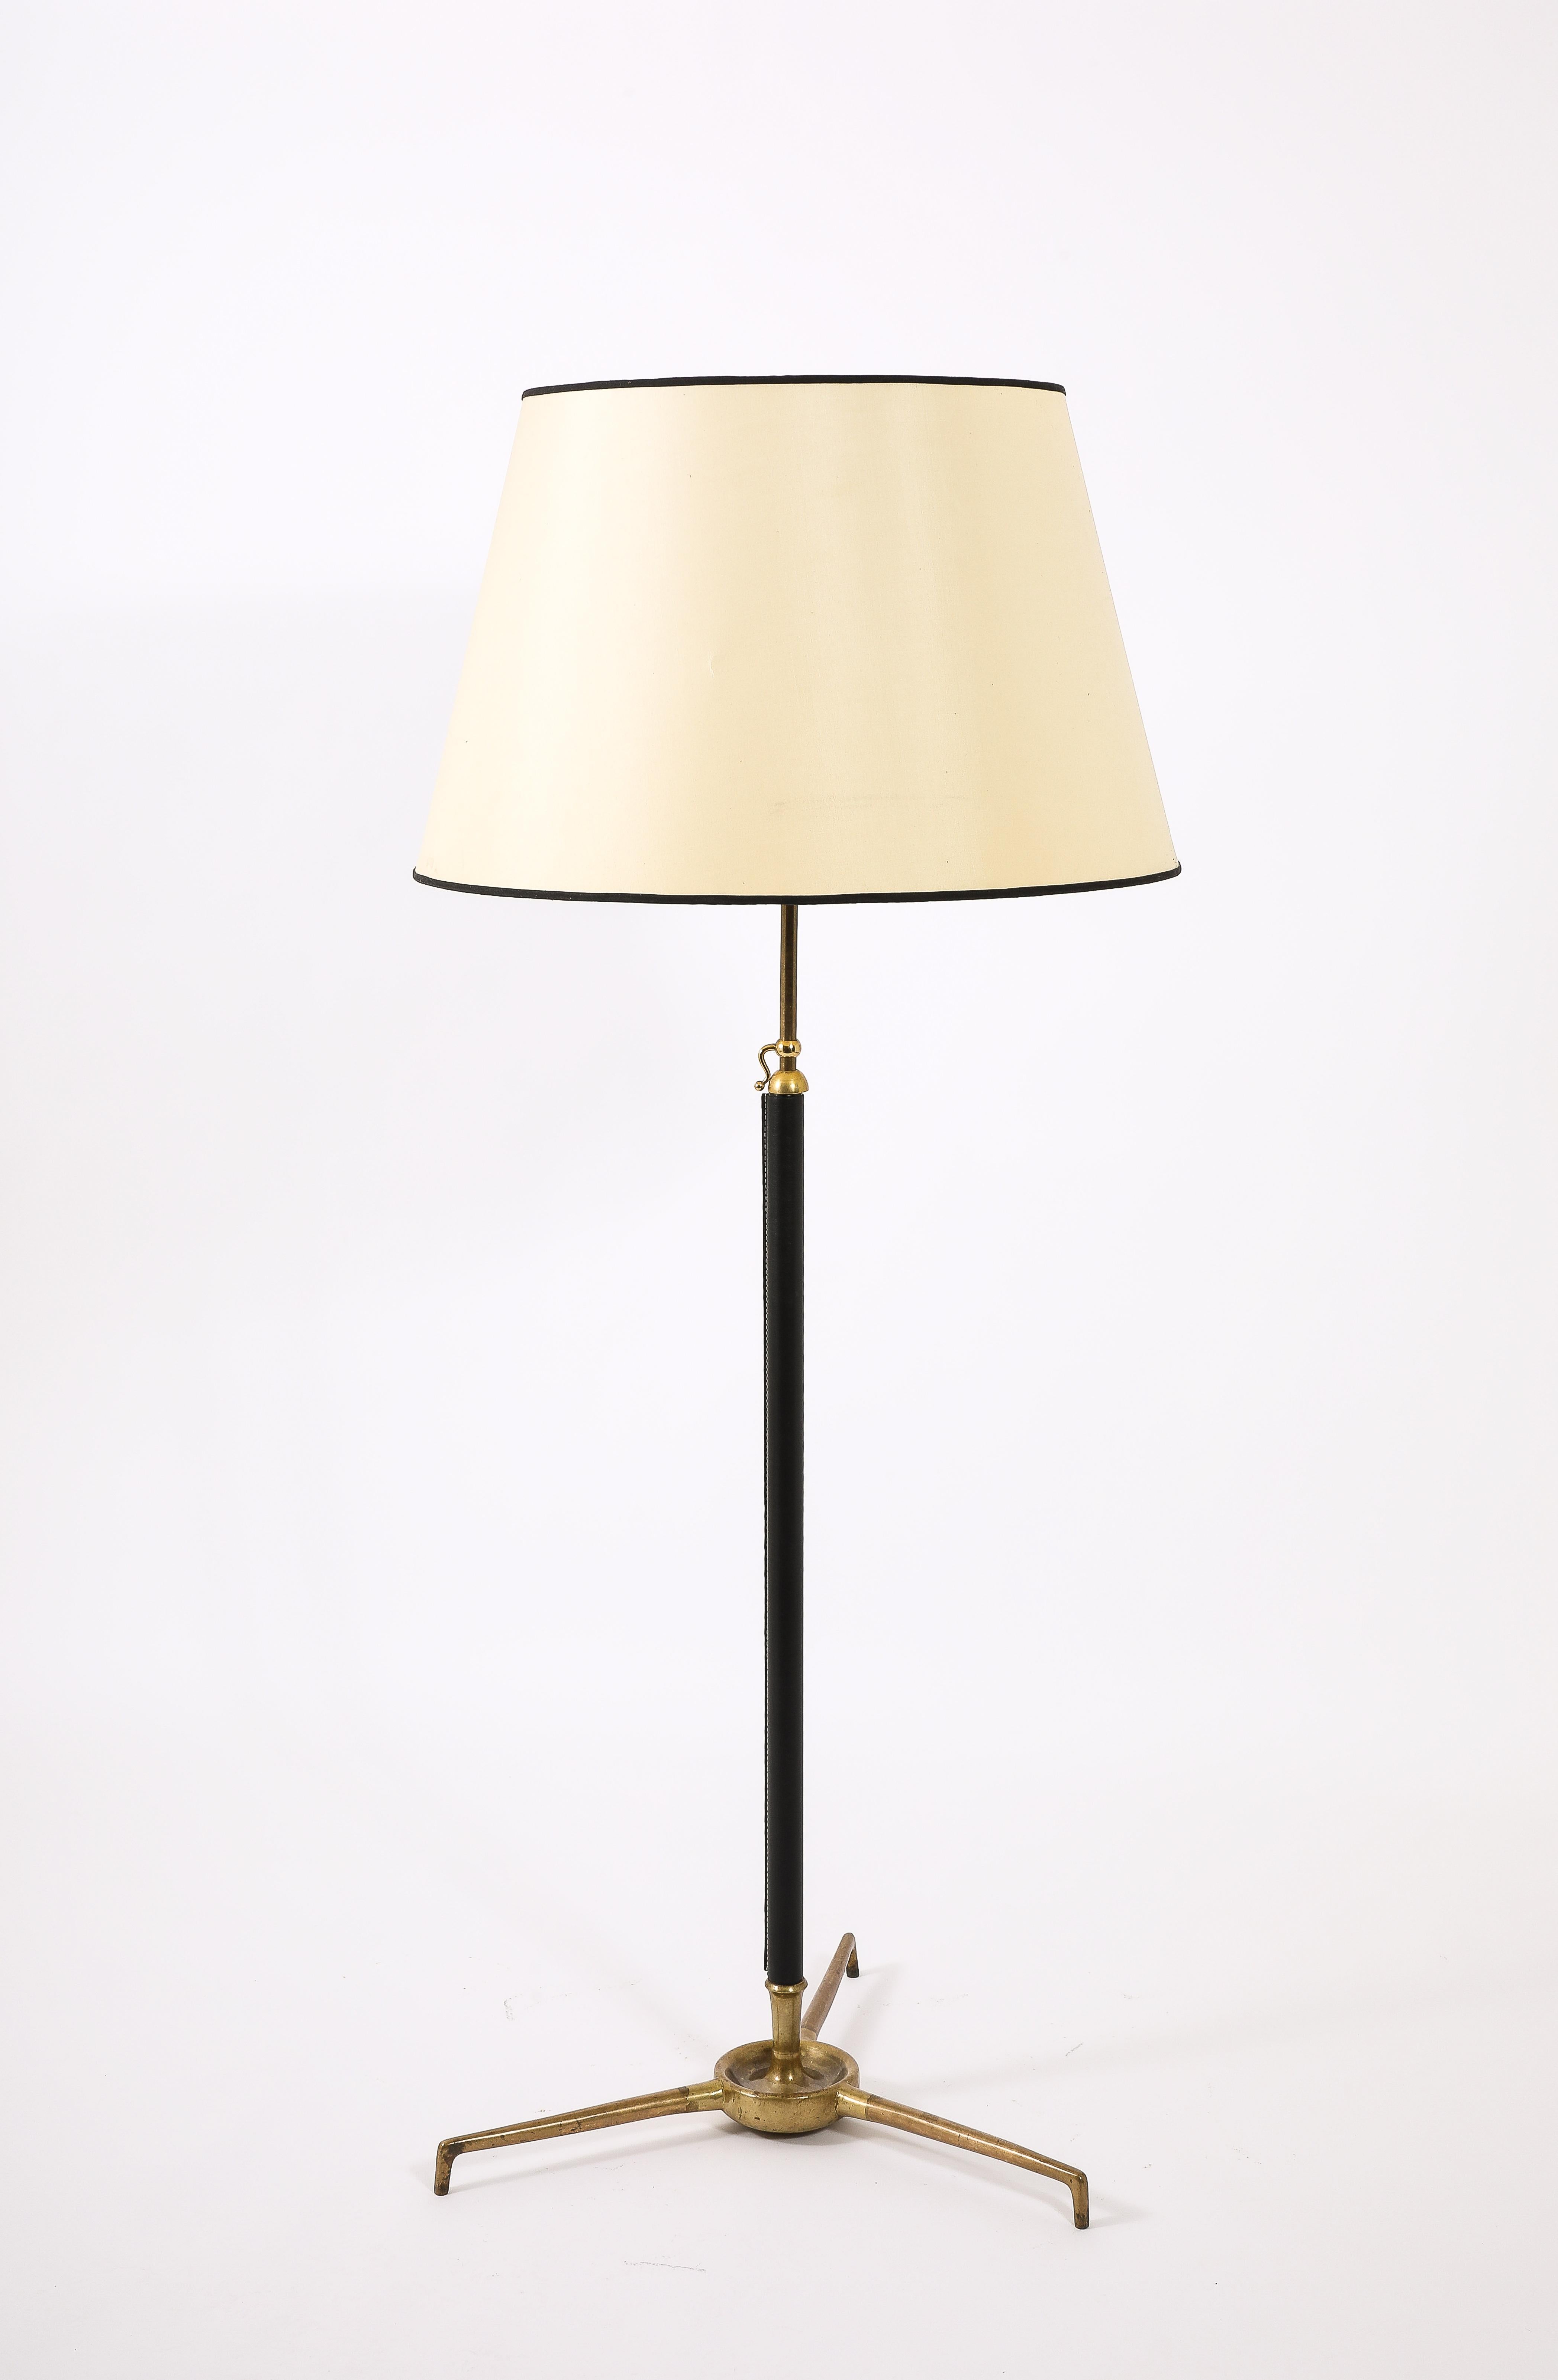 Large Bronze & Leather Floor Lamp by Arlus, France 1950's For Sale 2